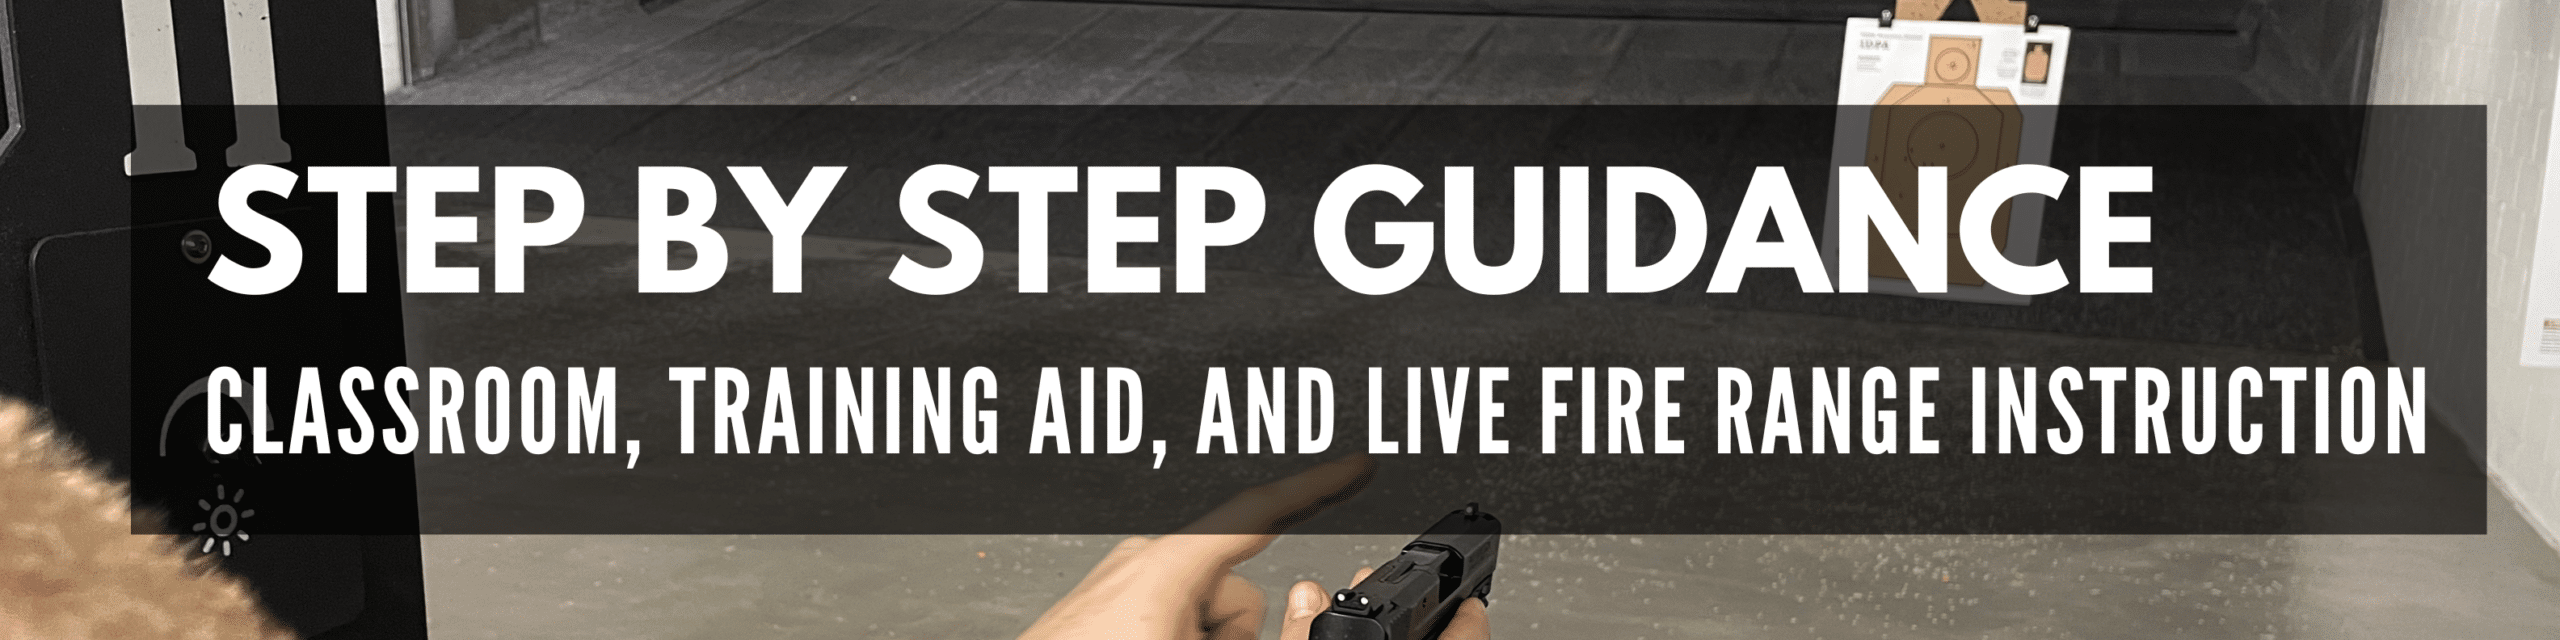 Step by step guidance with classroom, training aid, and live fire instruction